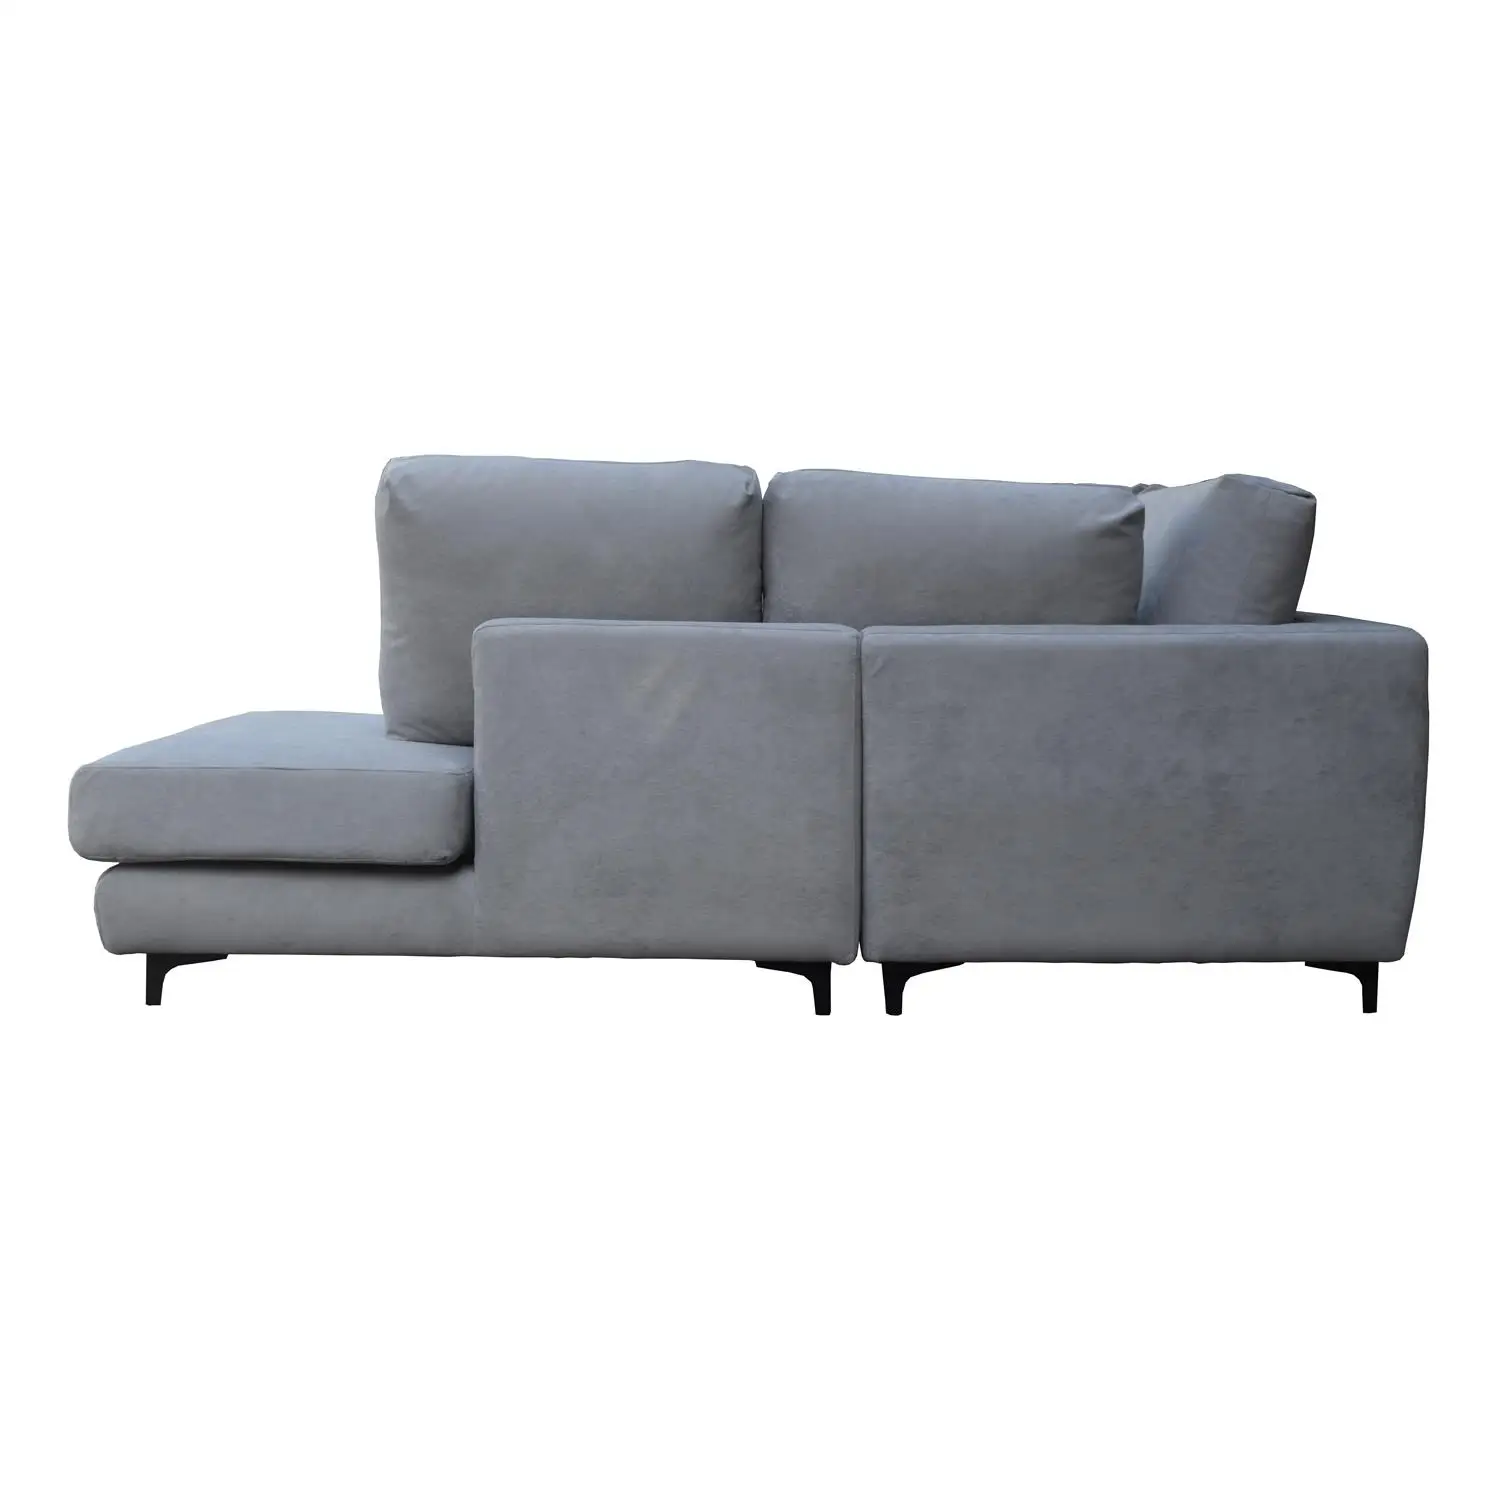 Waterproof fabric living room sofas?old?  grey fabric furniture L sofa set for home use